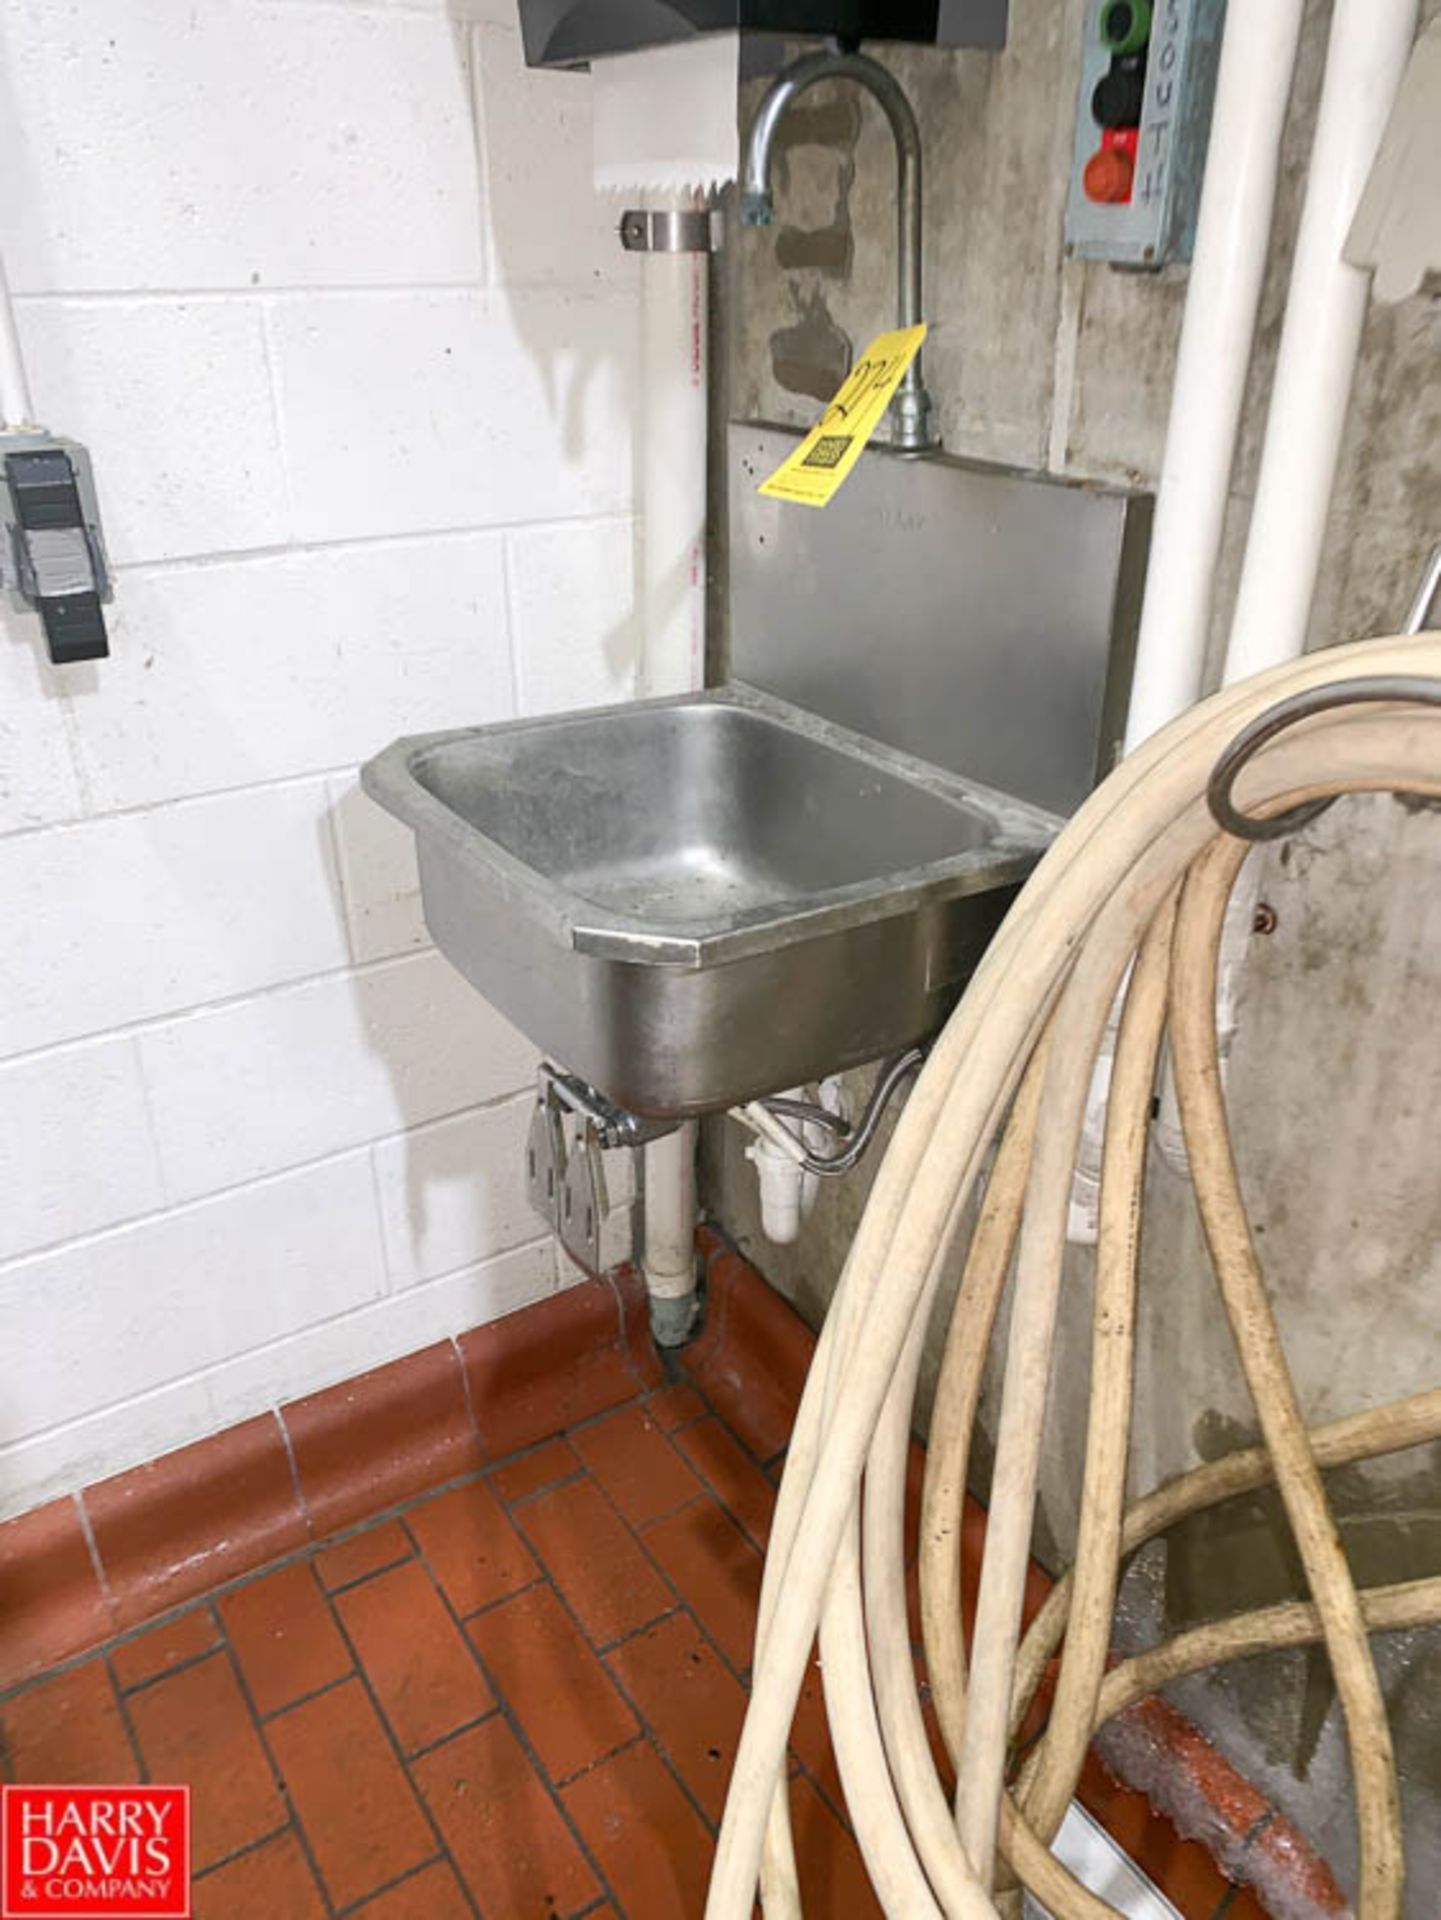 S/S Wash Sink with Knee Controller - Rigging Fee: $ 50